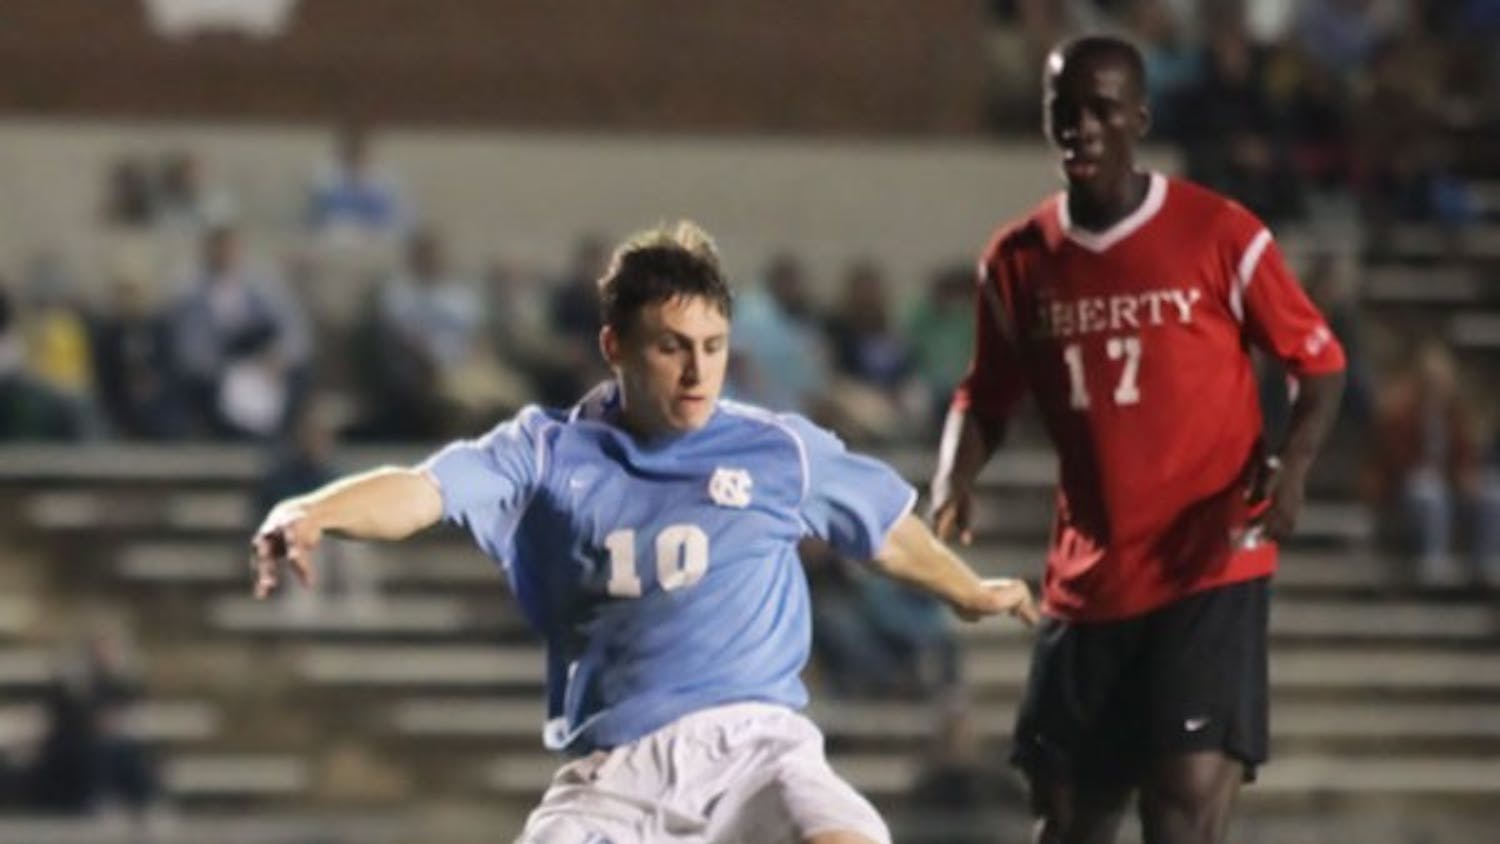 Billy Schuler had the game-winning goal for No. 2 North Carolina in the 74th minute of play Tuesday. DTH/Phong Dinh